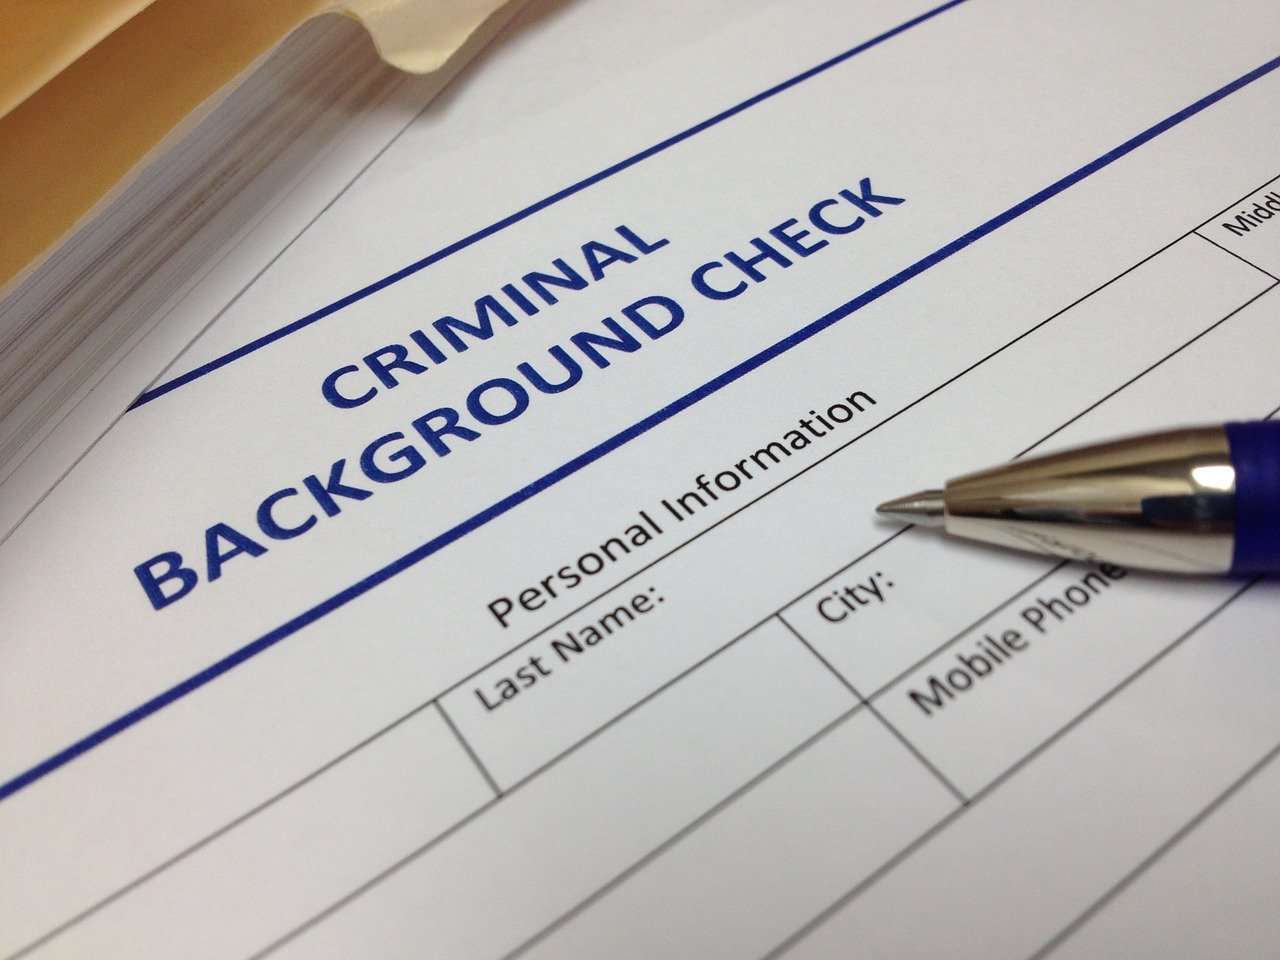 criminal background check form with a pen laying on top